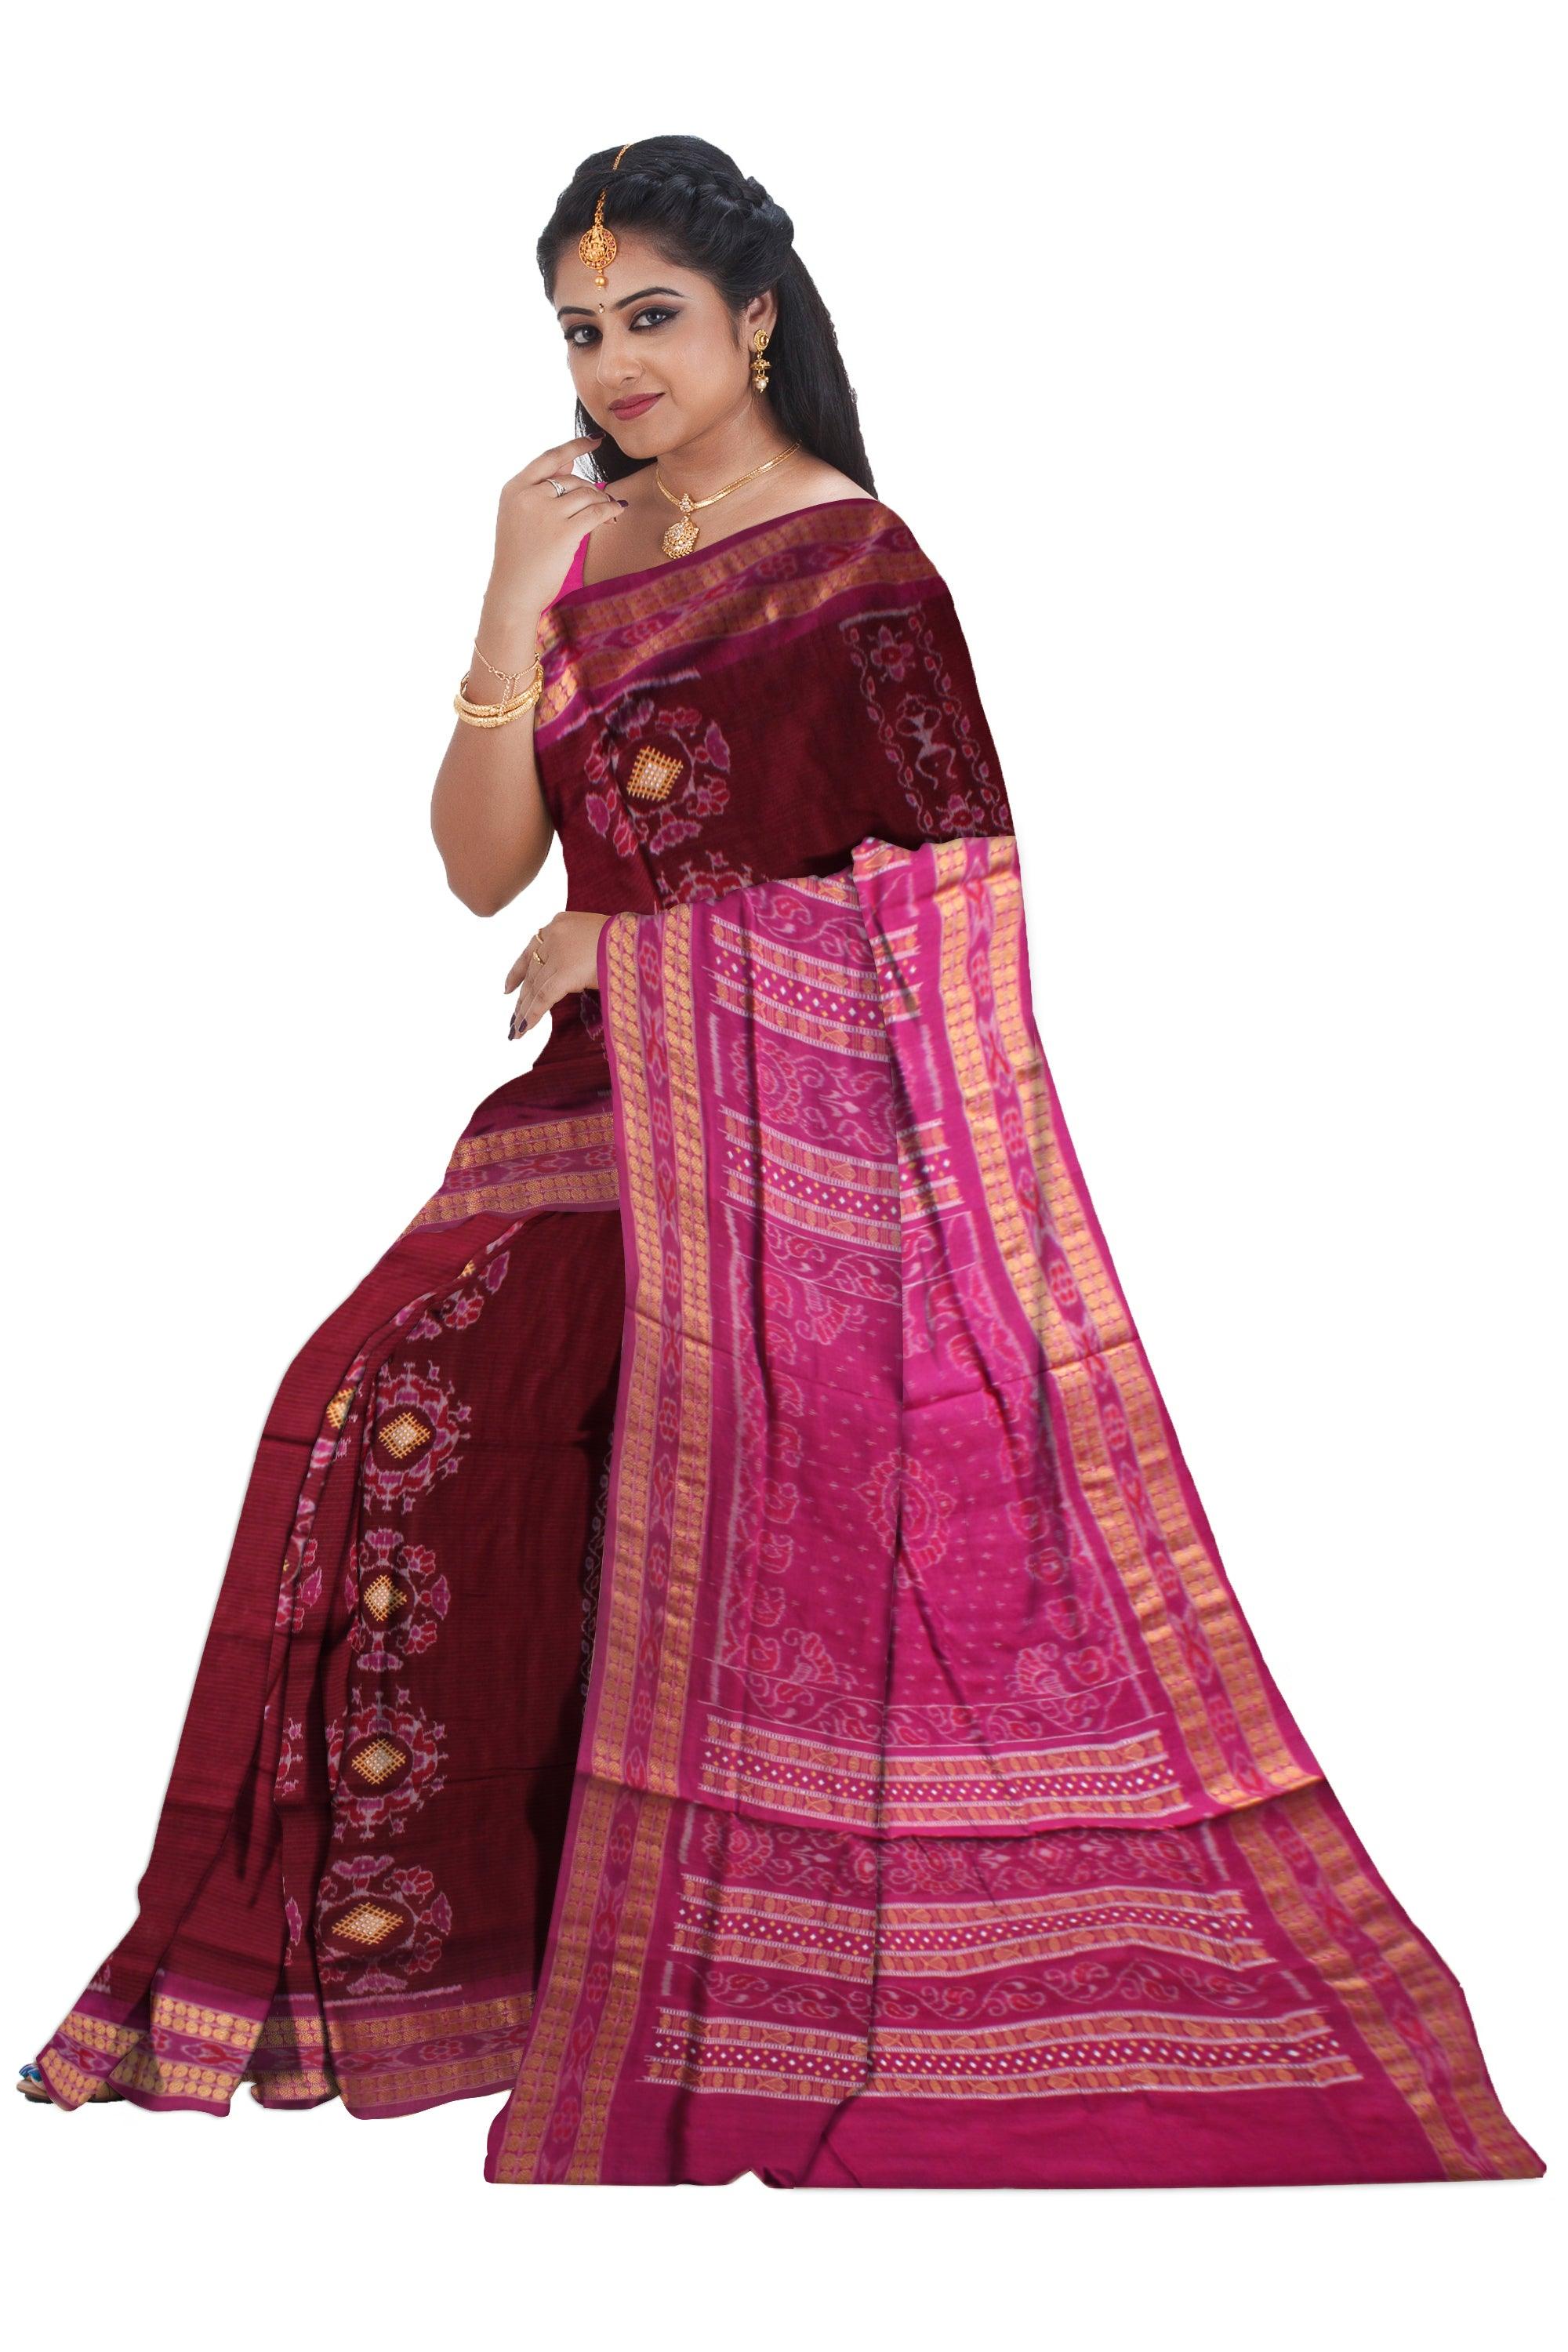 NEW COLLECTION TERRACOTTA DESIGN COTTON SAREE IN MAROON AND PINK COLOUR AVAILABLE WITH BLOUSE. - Koshali Arts & Crafts Enterprise